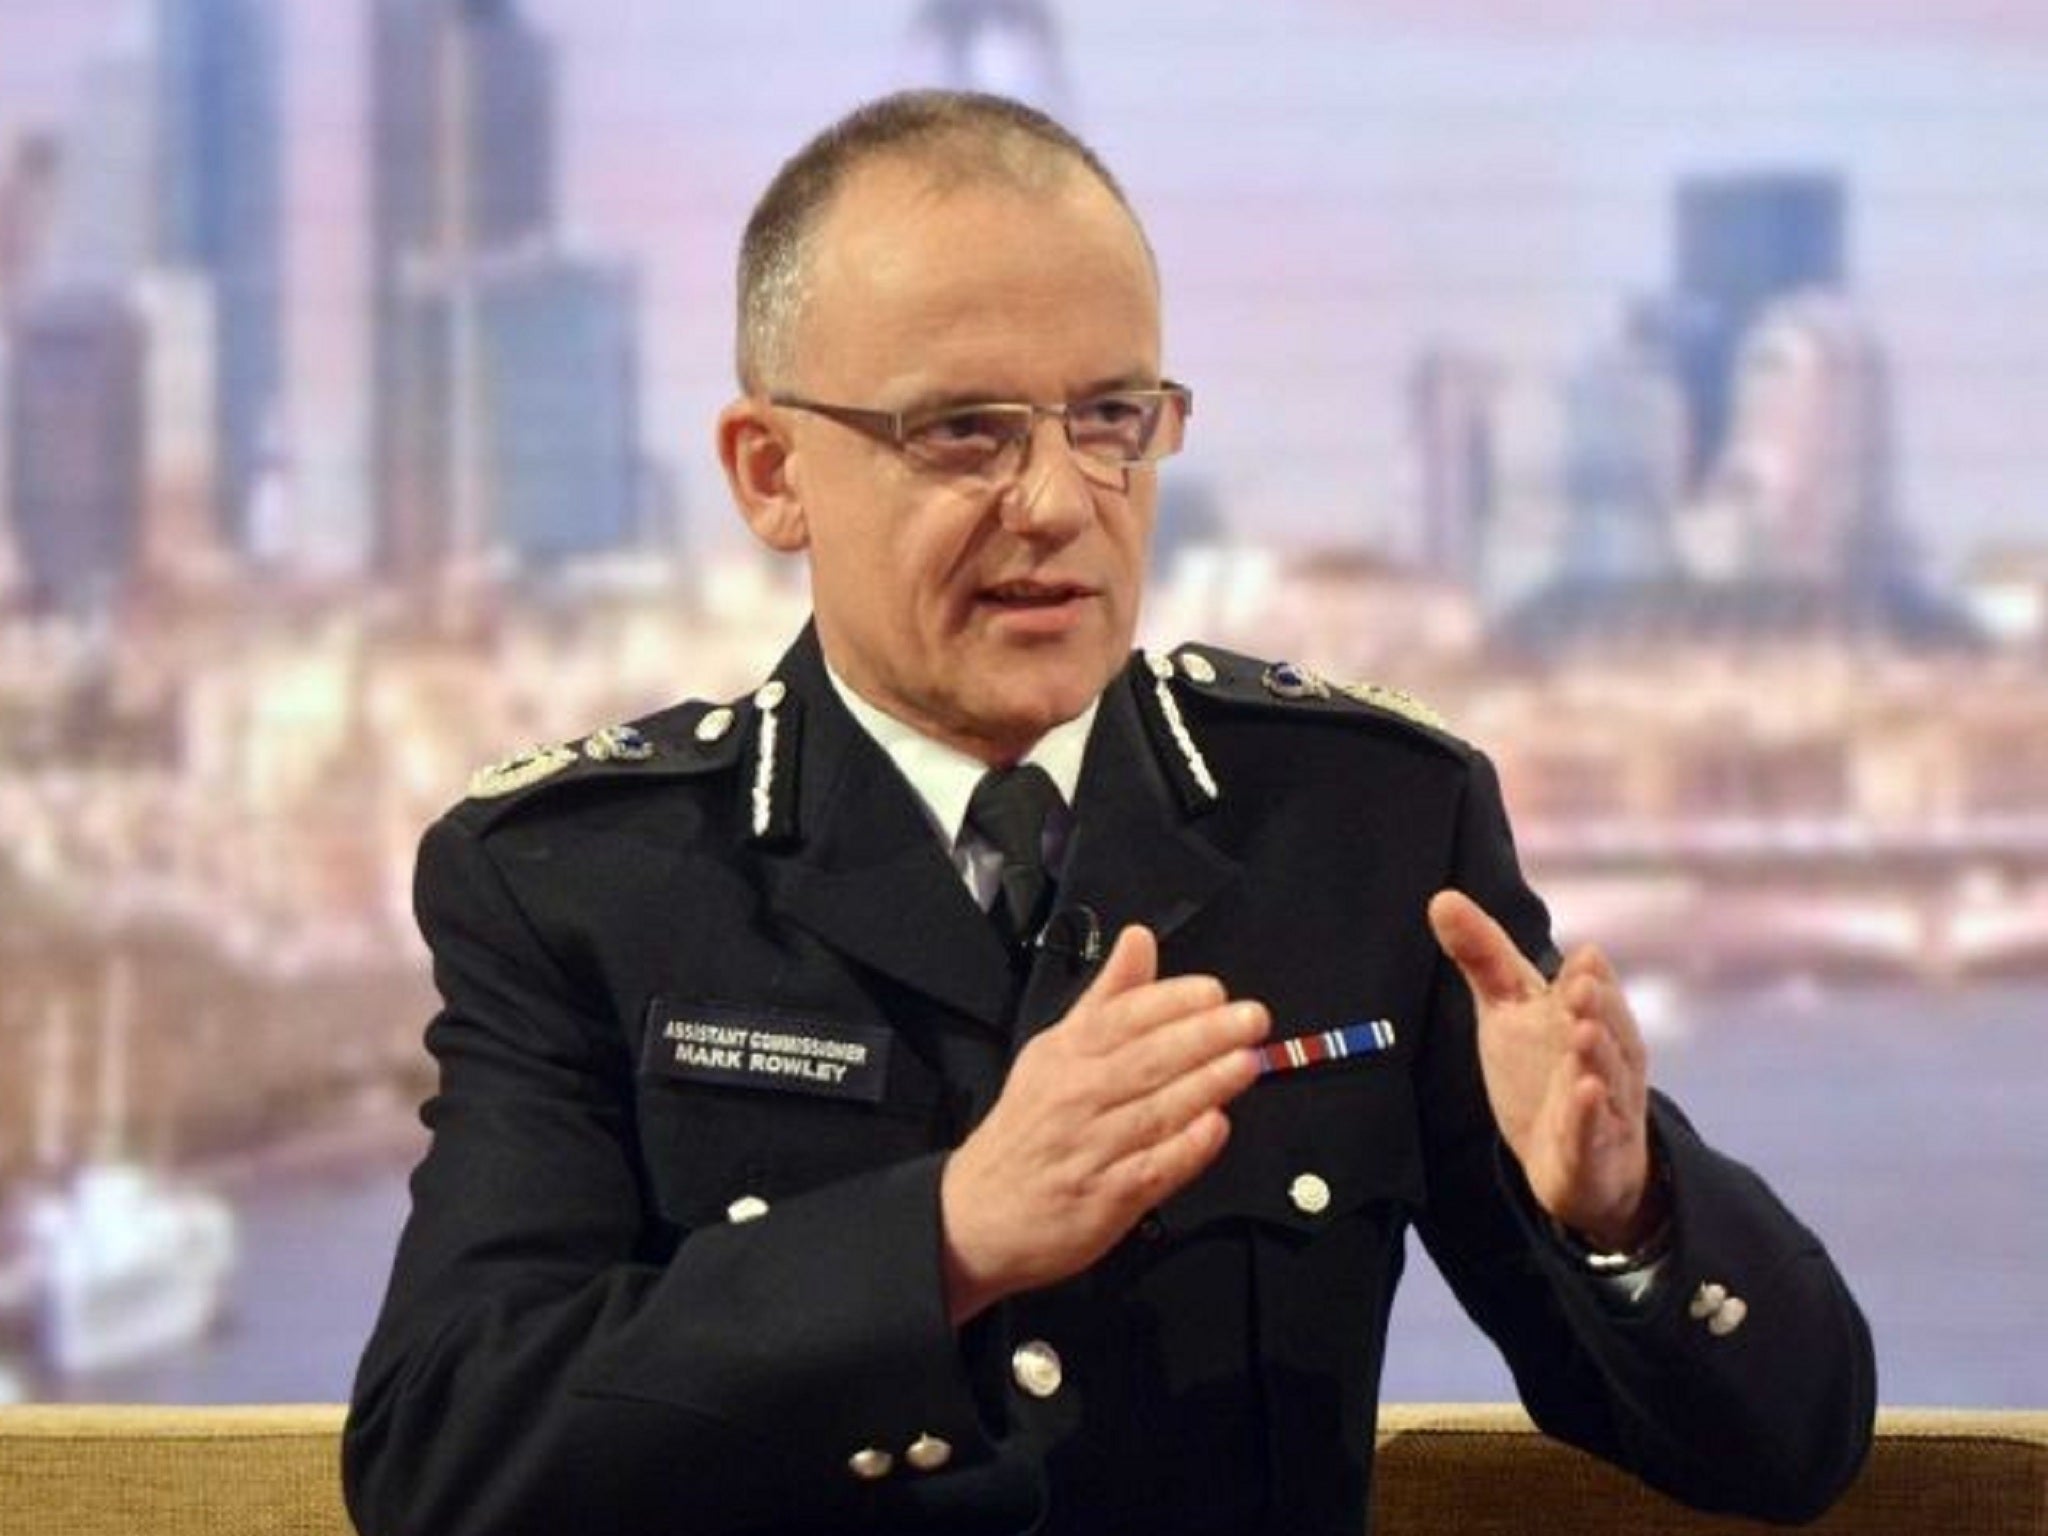 Mark Rowley, assistant commissioner of Scotland Yard, spoke on The Andrew Marr Show